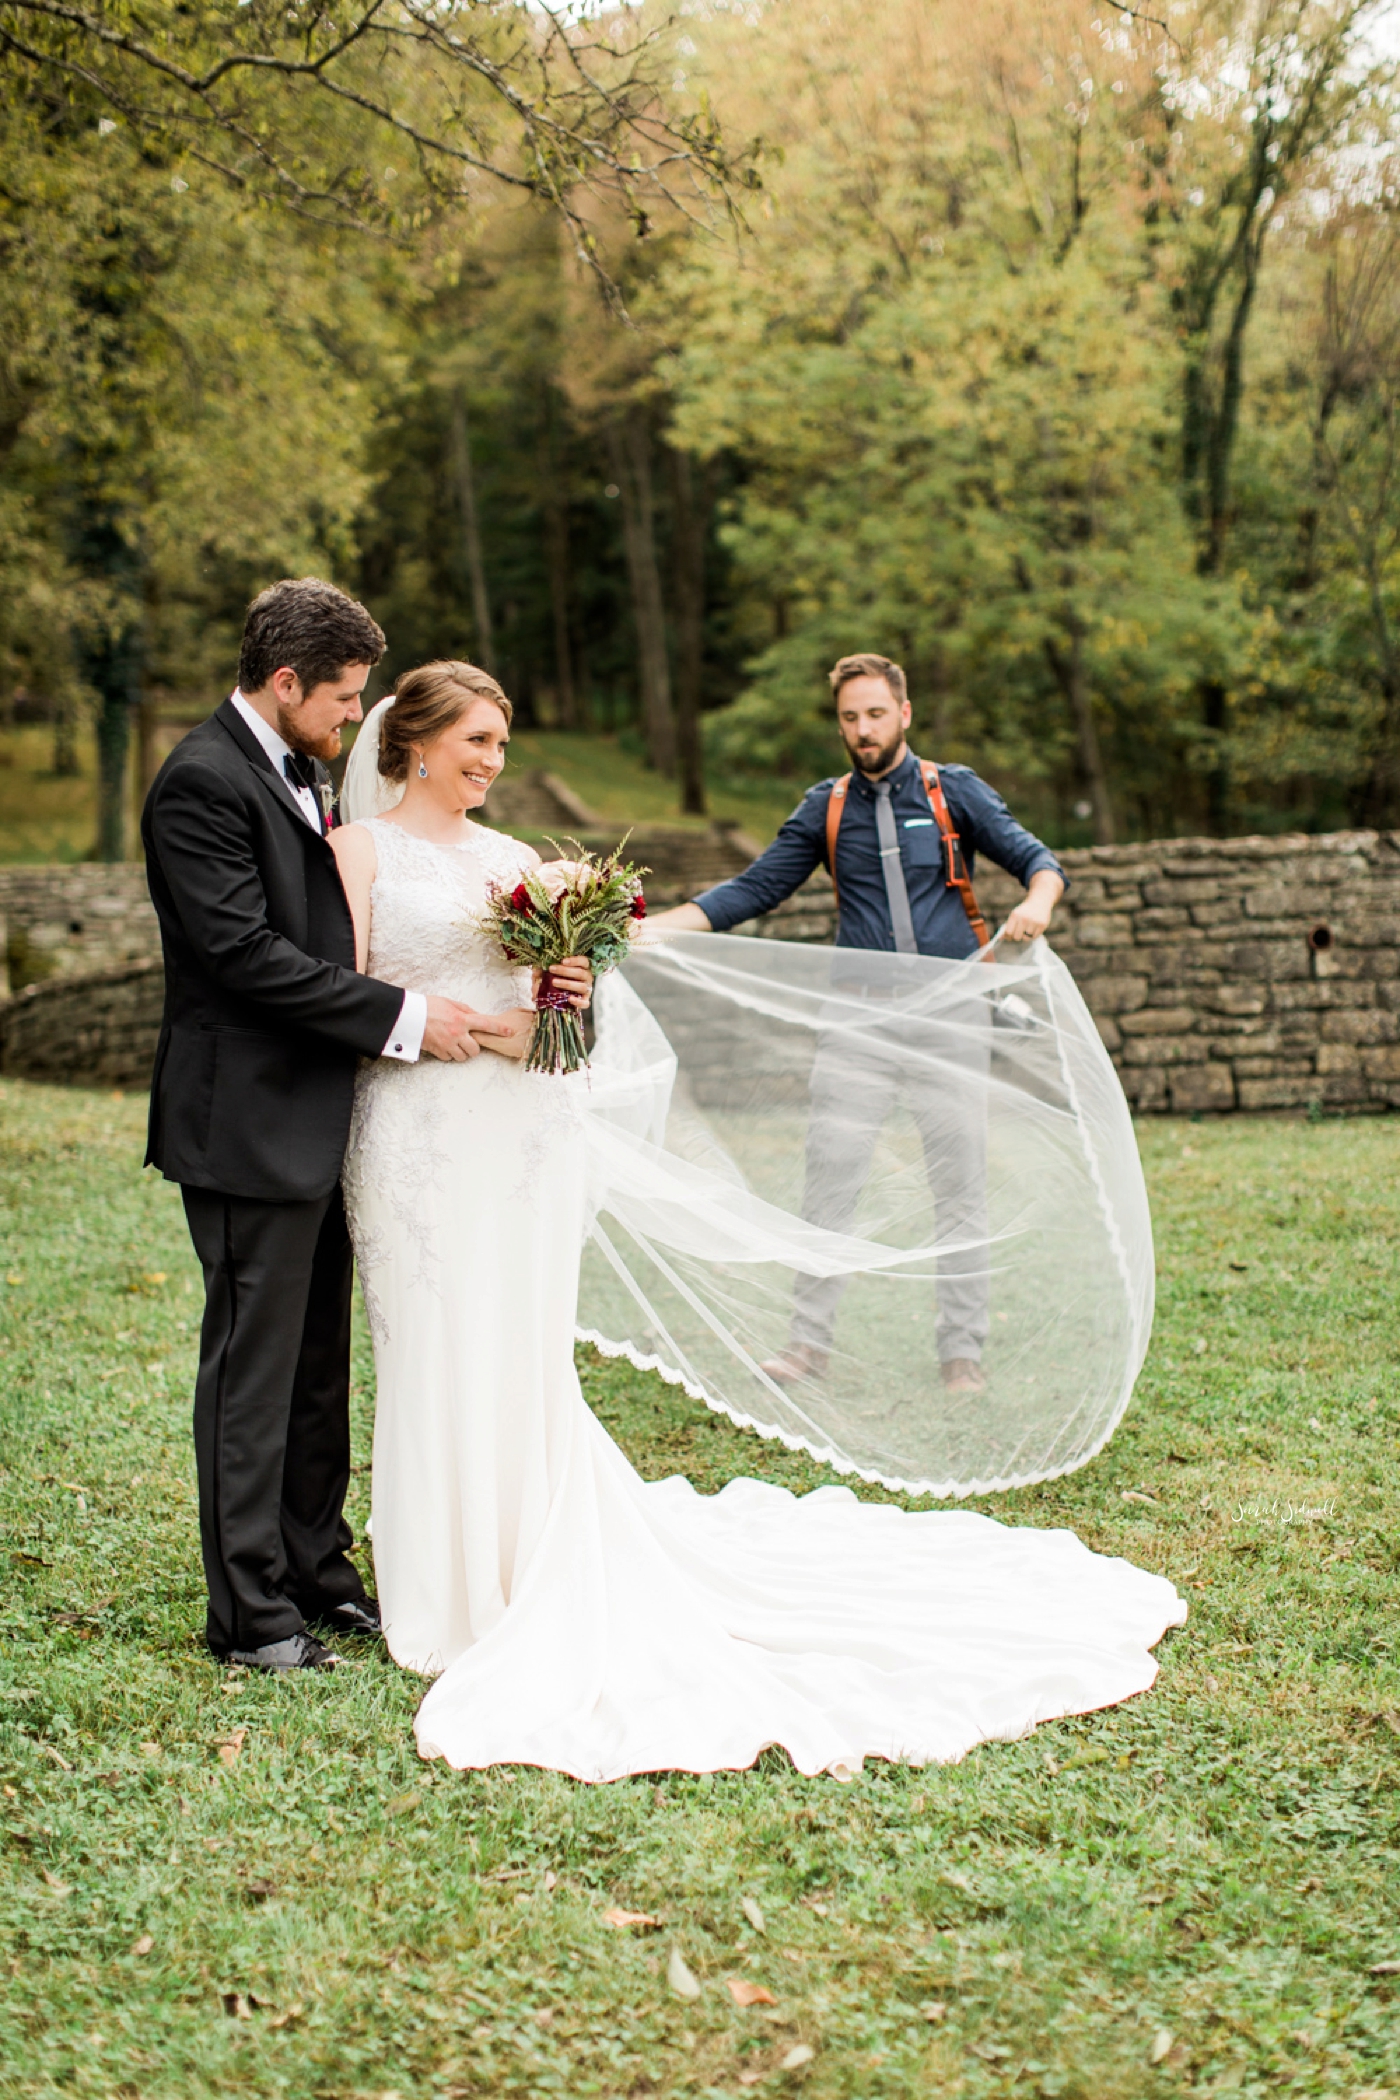 Wedding photography by Sarah Sidwell Photography.